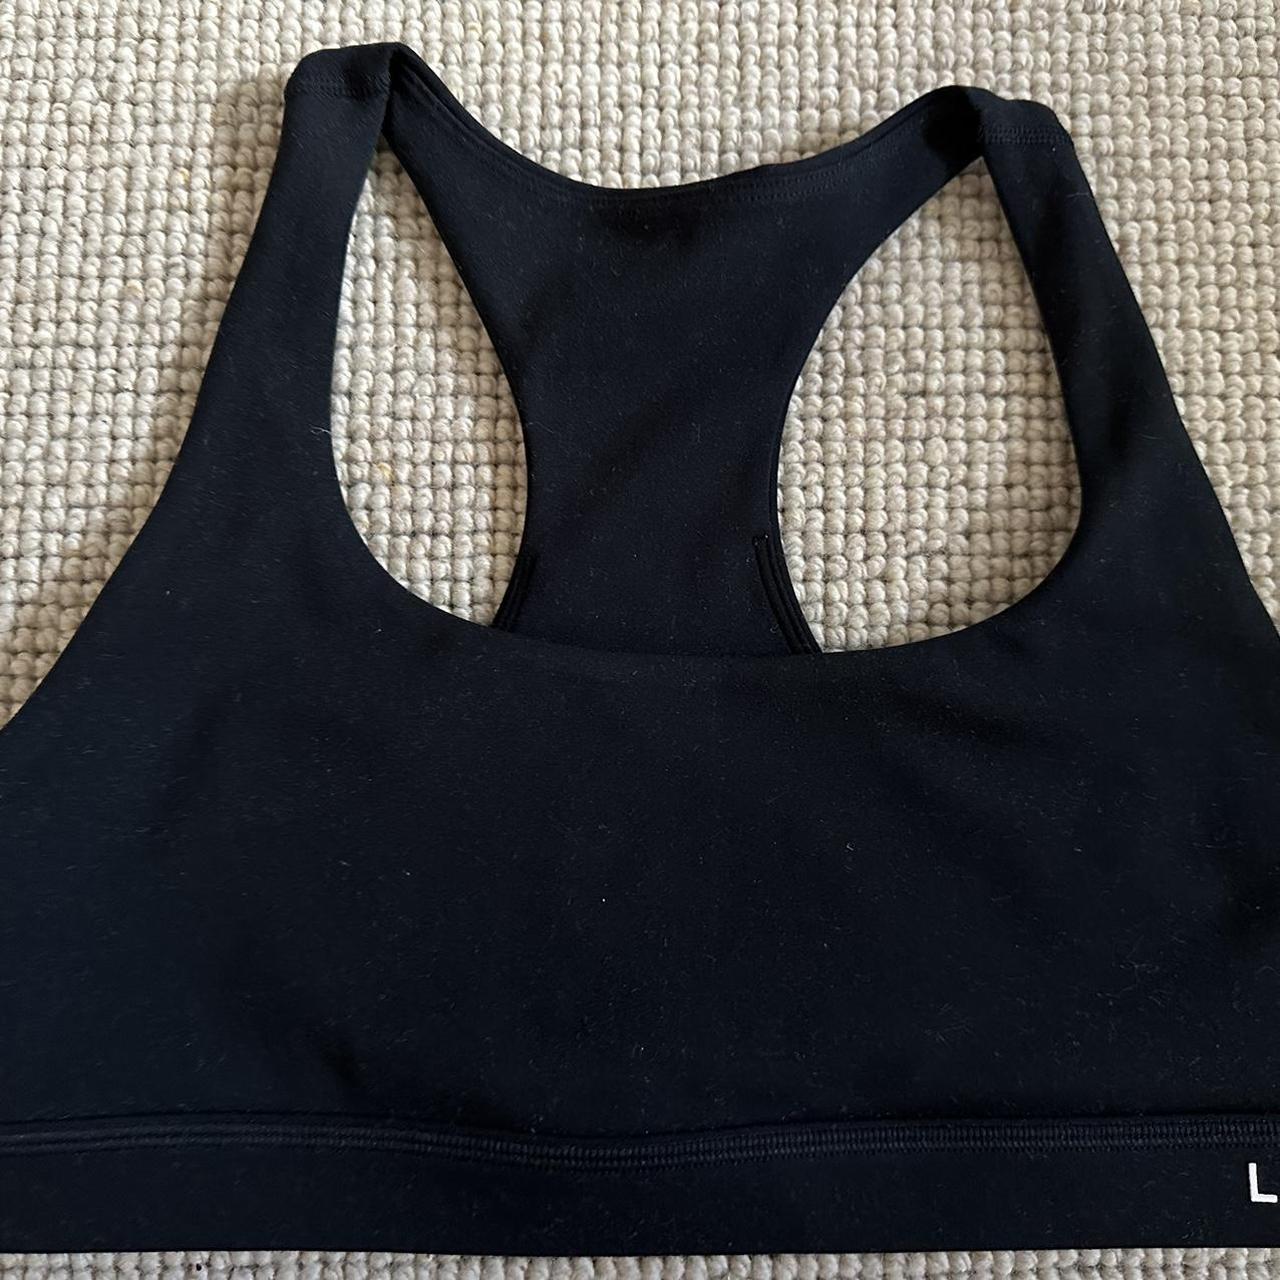 Black LSKD sports bra. Moderate support, perfect for... - Depop